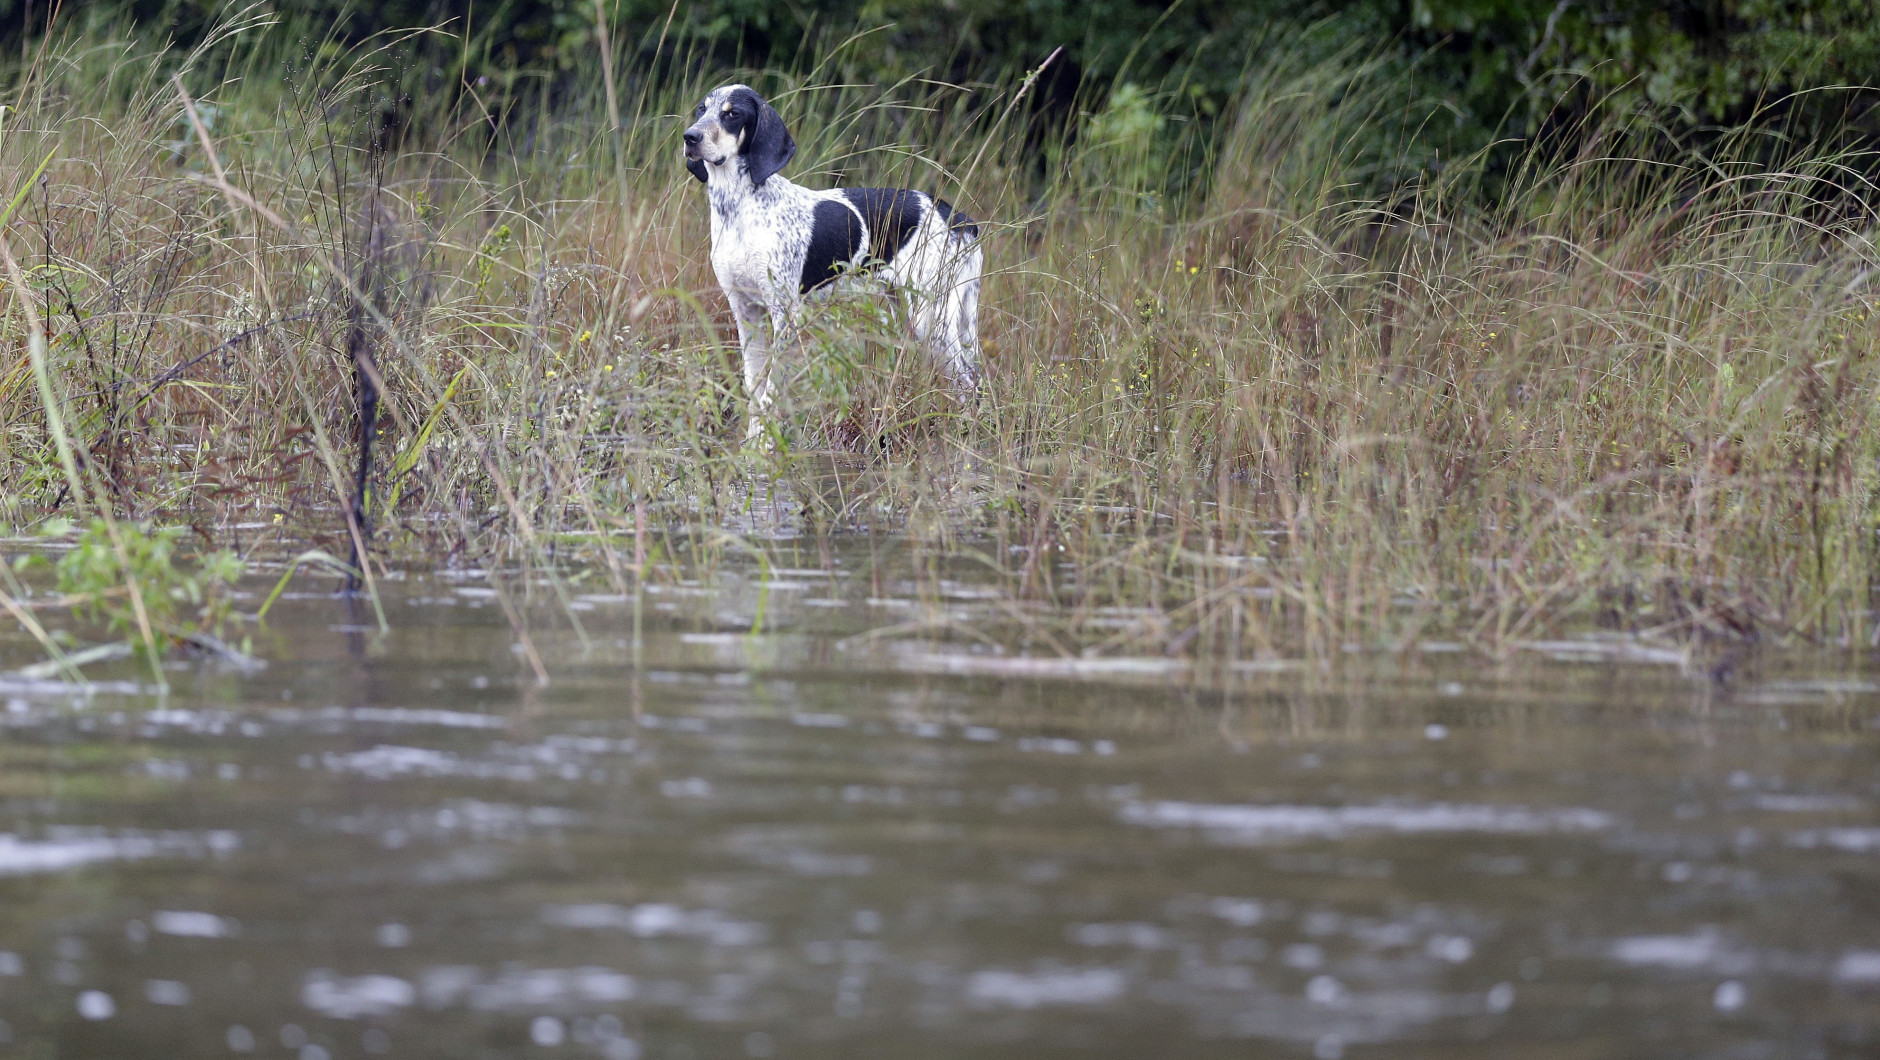 A dog is cut off from it's home because of floodwaters in Florence, S.C., Monday, Oct. 5, 2015. Flooding continues throughout the state following record rainfall amounts over the last several days. (AP Photo/Gerry Broome)